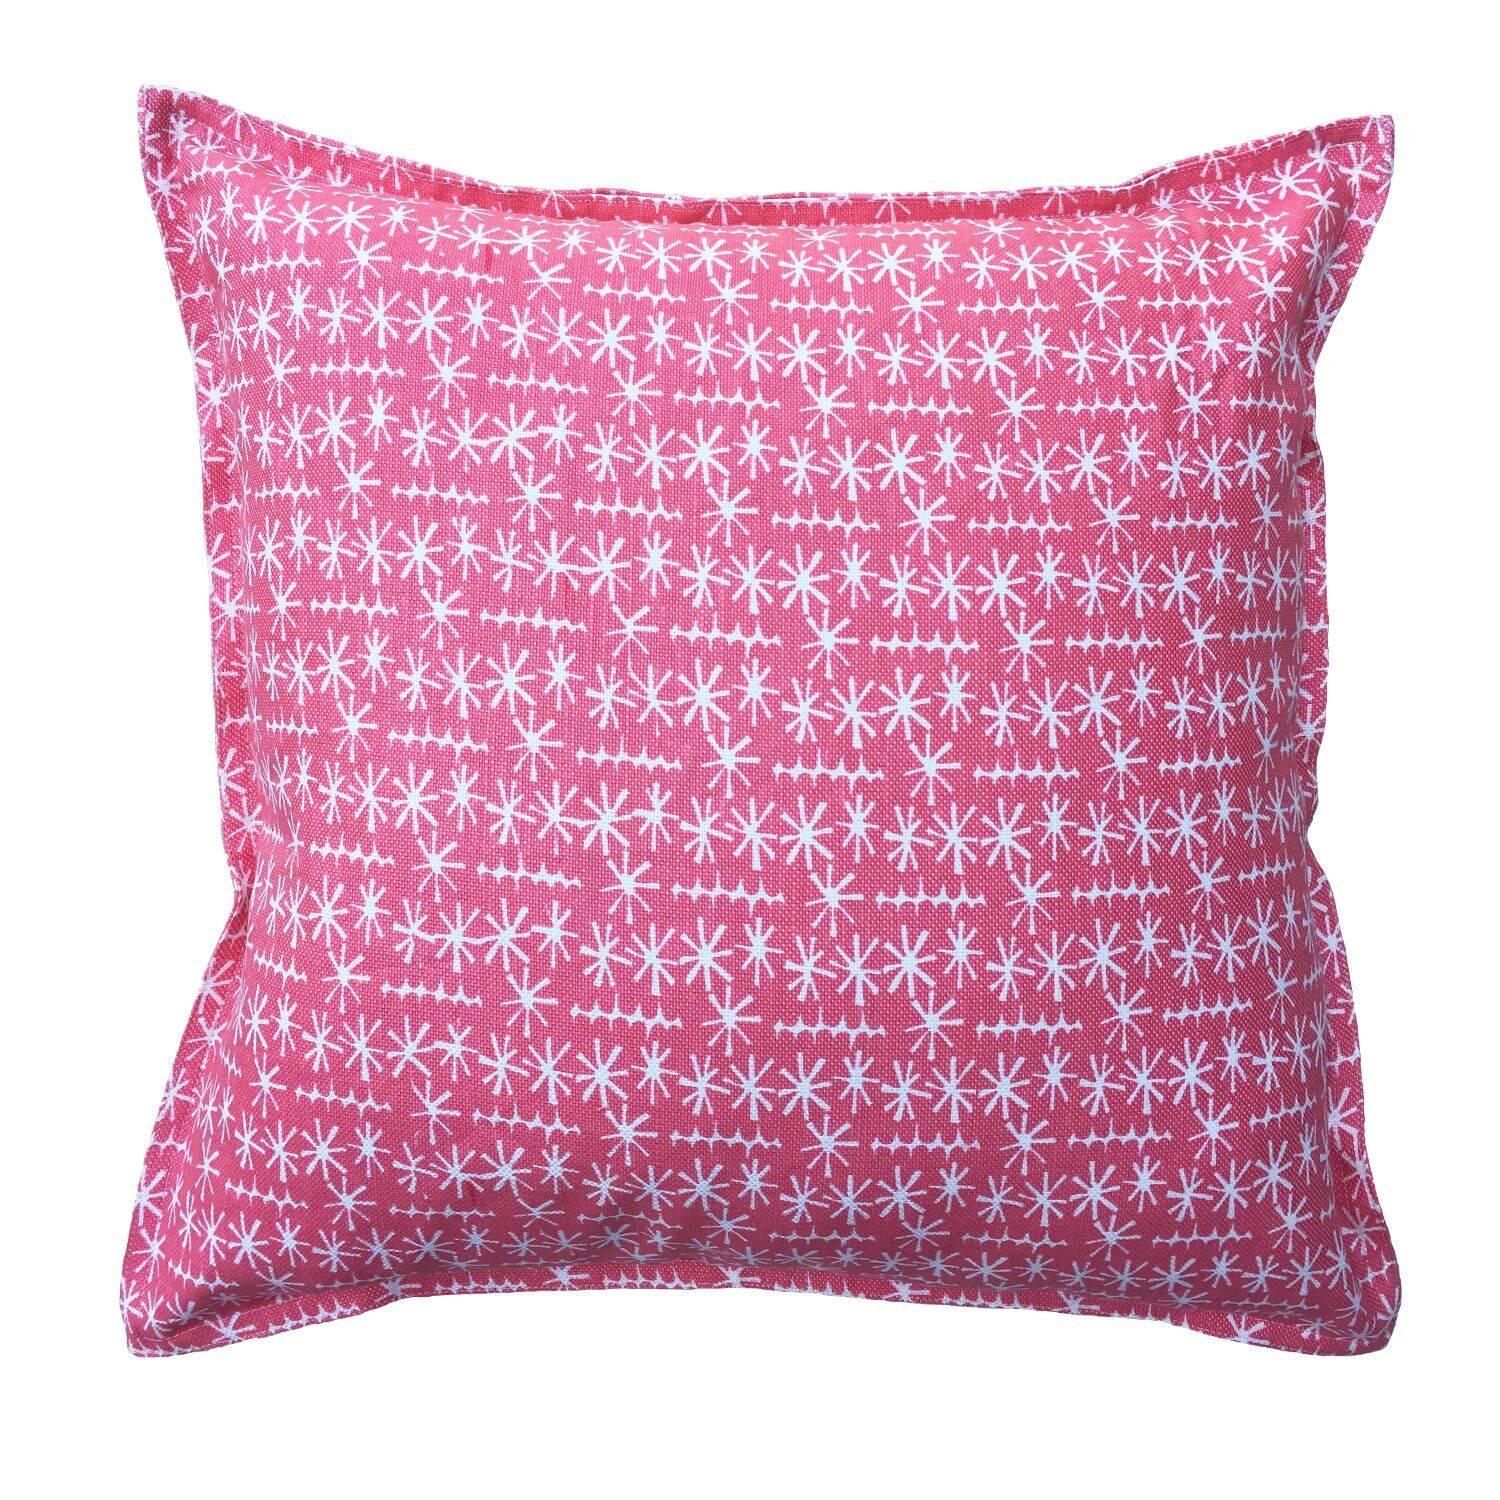 Dahlia Star Ticket on Oyster Cotton Linen Pillow For Sale